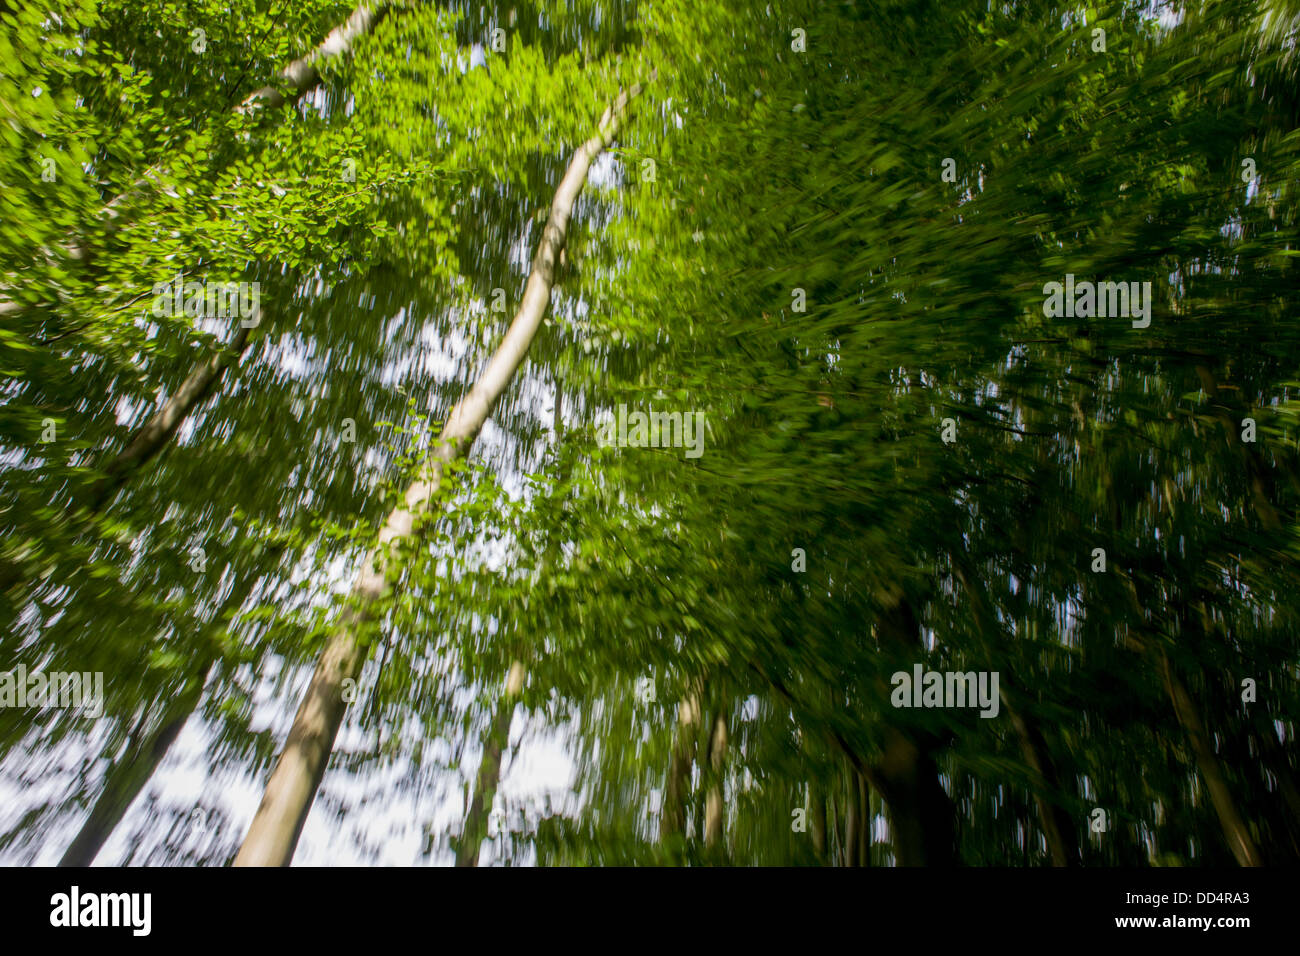 Blurred_vegetation_of_beech_trees_during